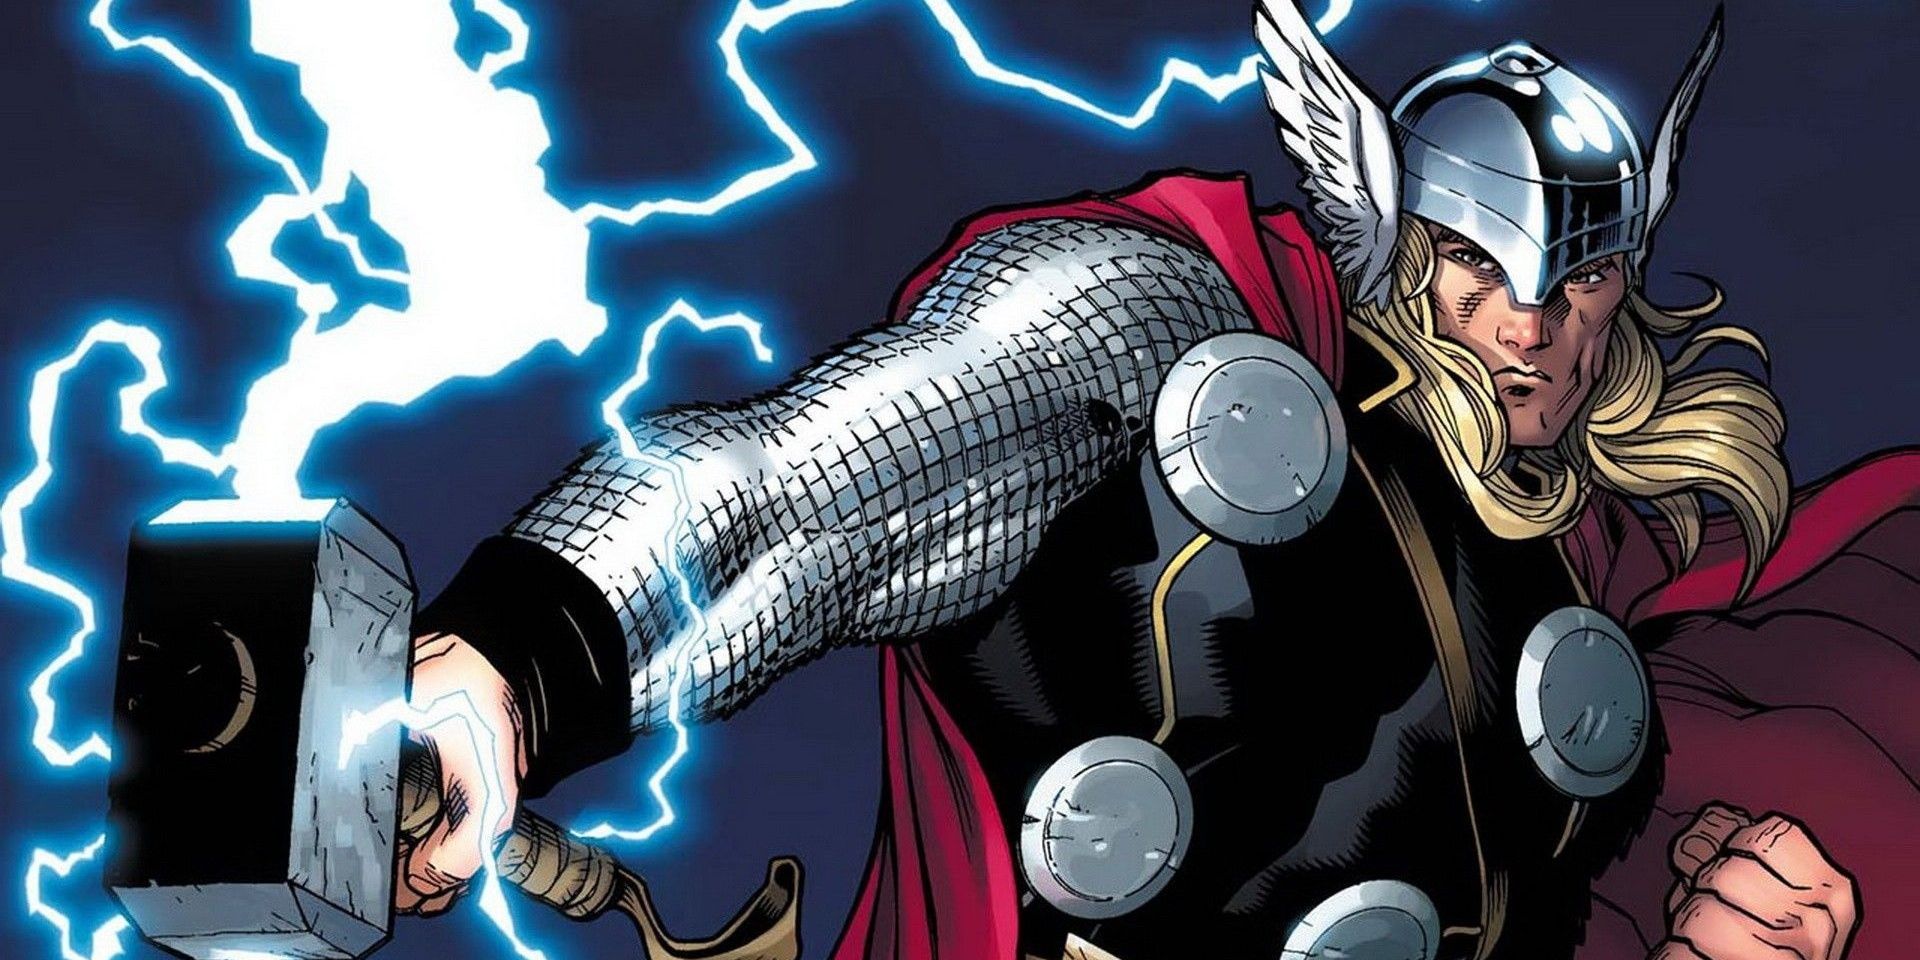 Marvel Comics' Thor about to summon lightning with his hammer